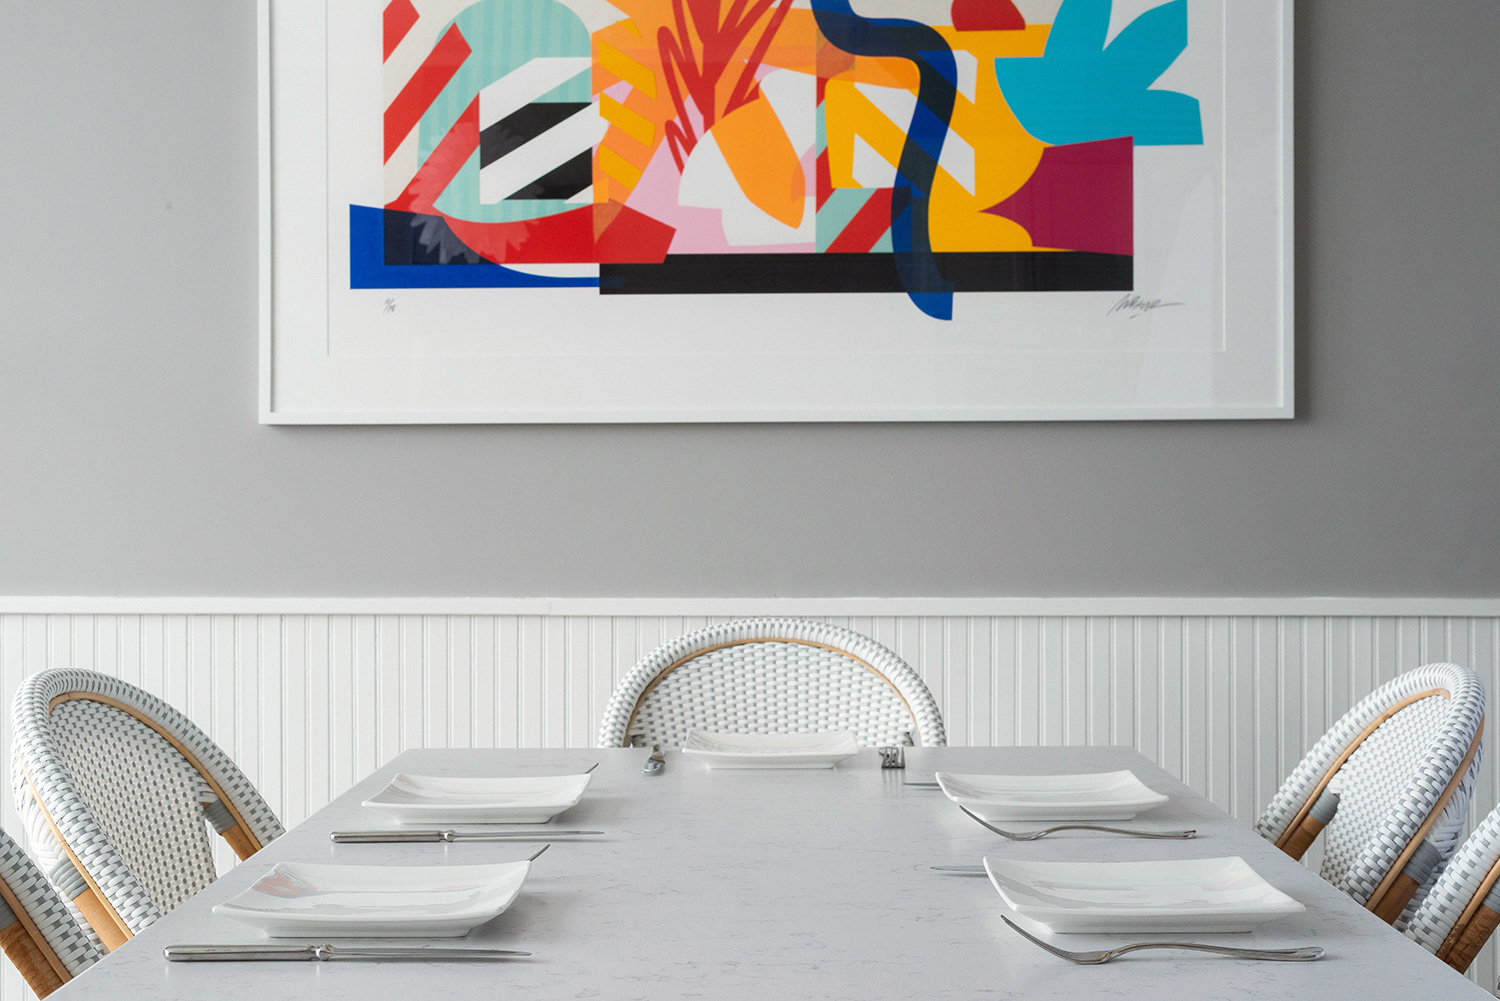 White chairs and dining table in front of colourful painting.